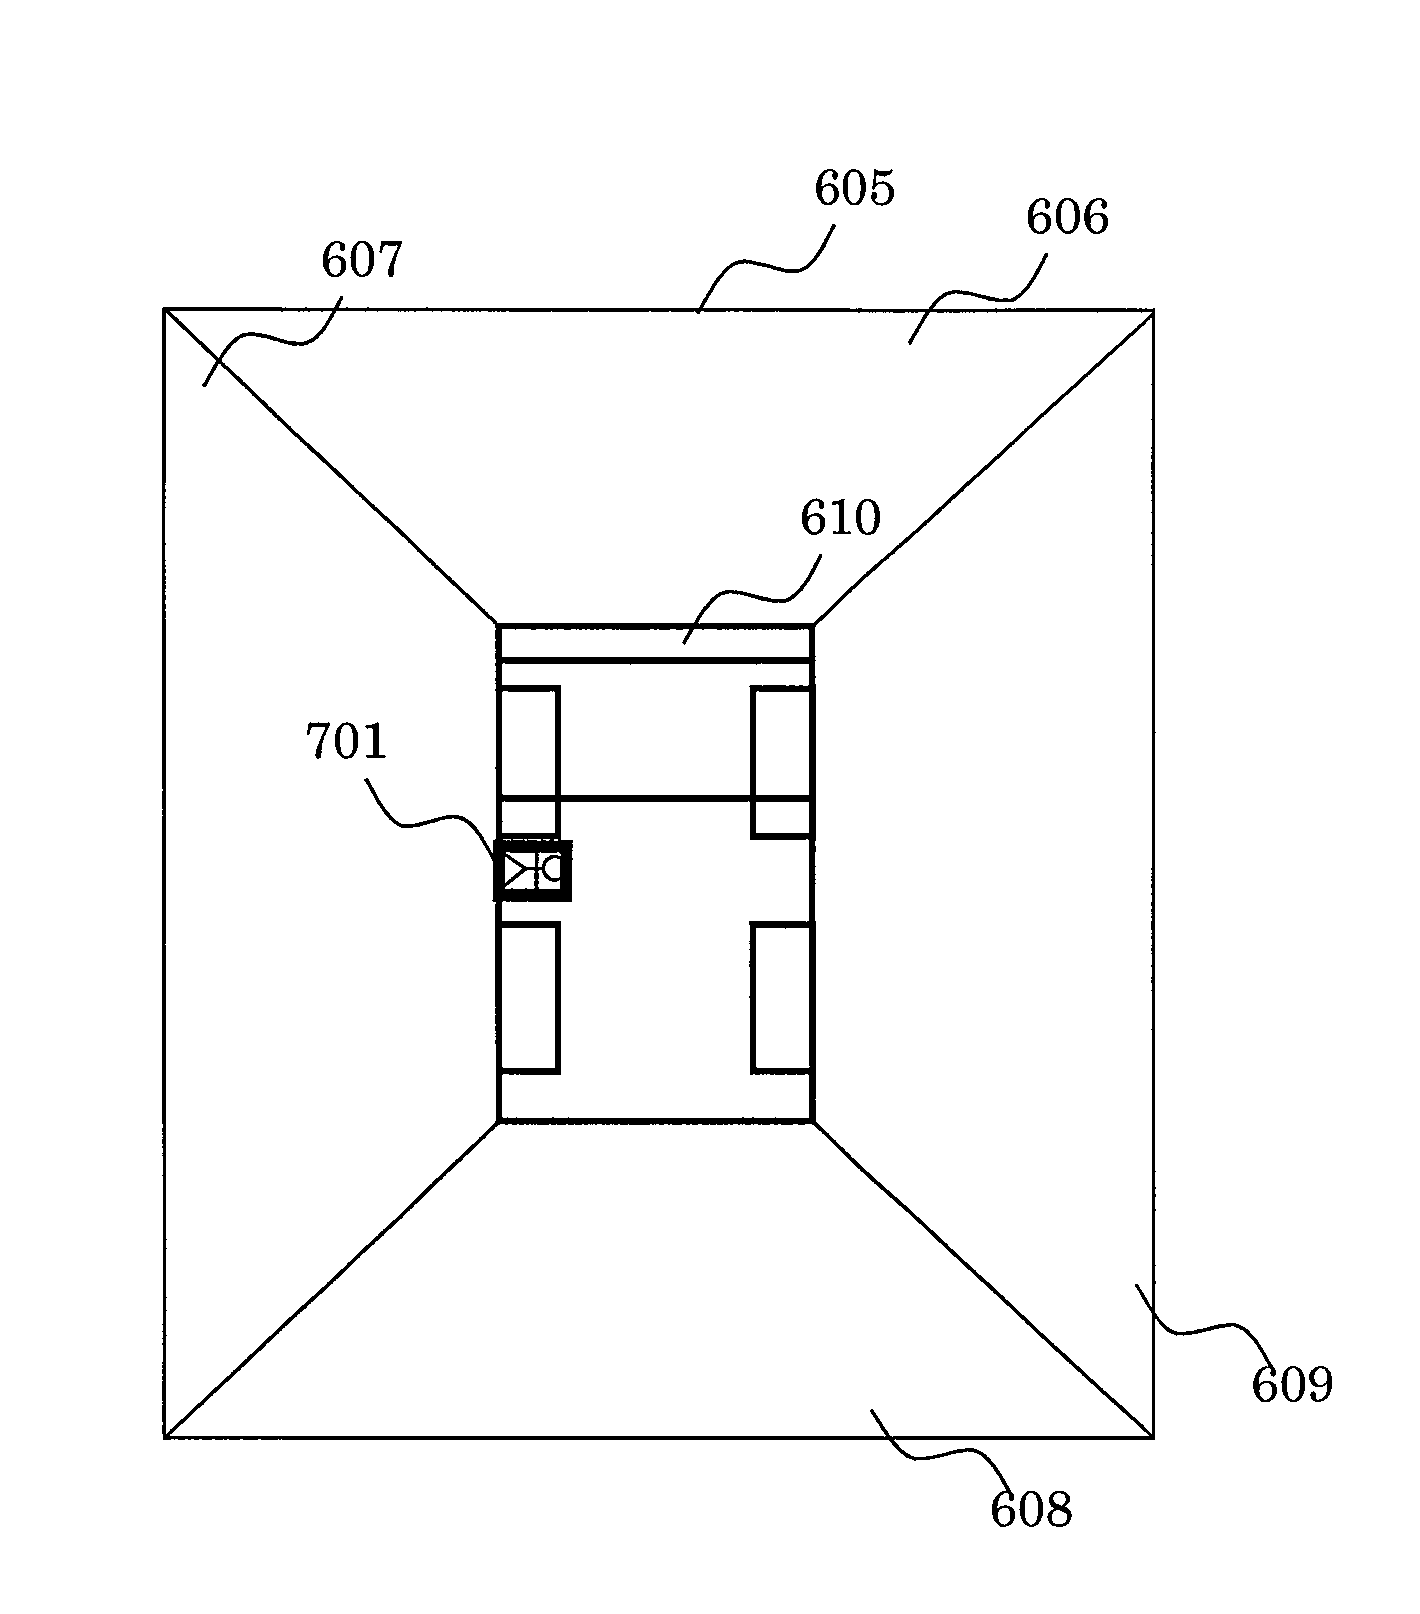 Vehicle peripheral obstacle notification system